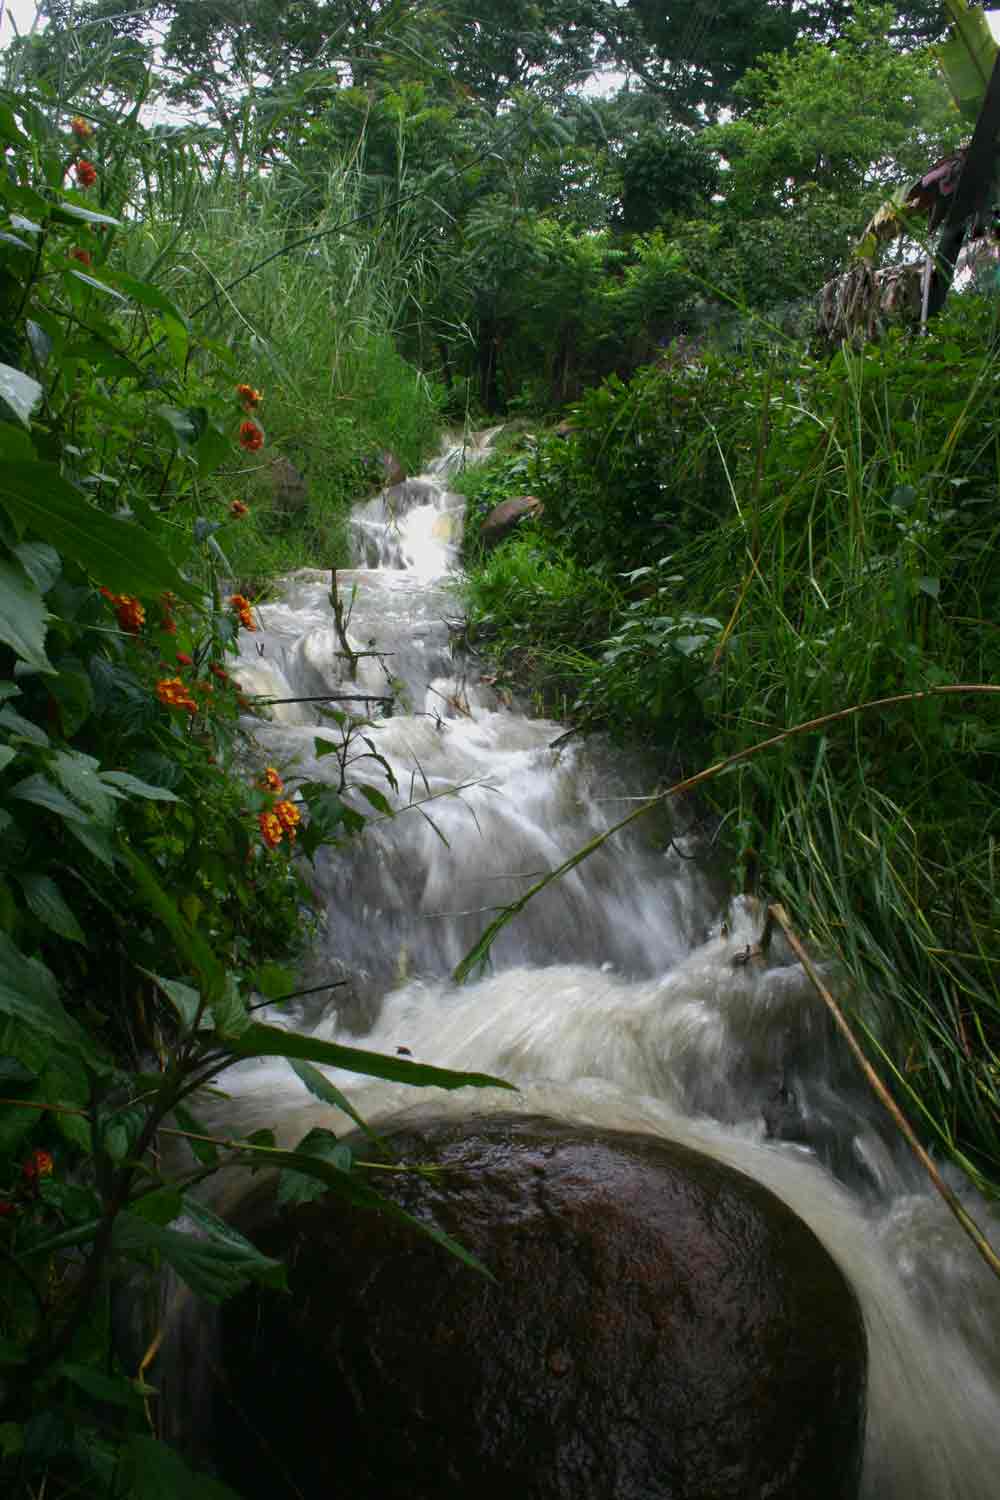 View of a temporary dramatic overflow stream arising in the very wet conditions at the time.